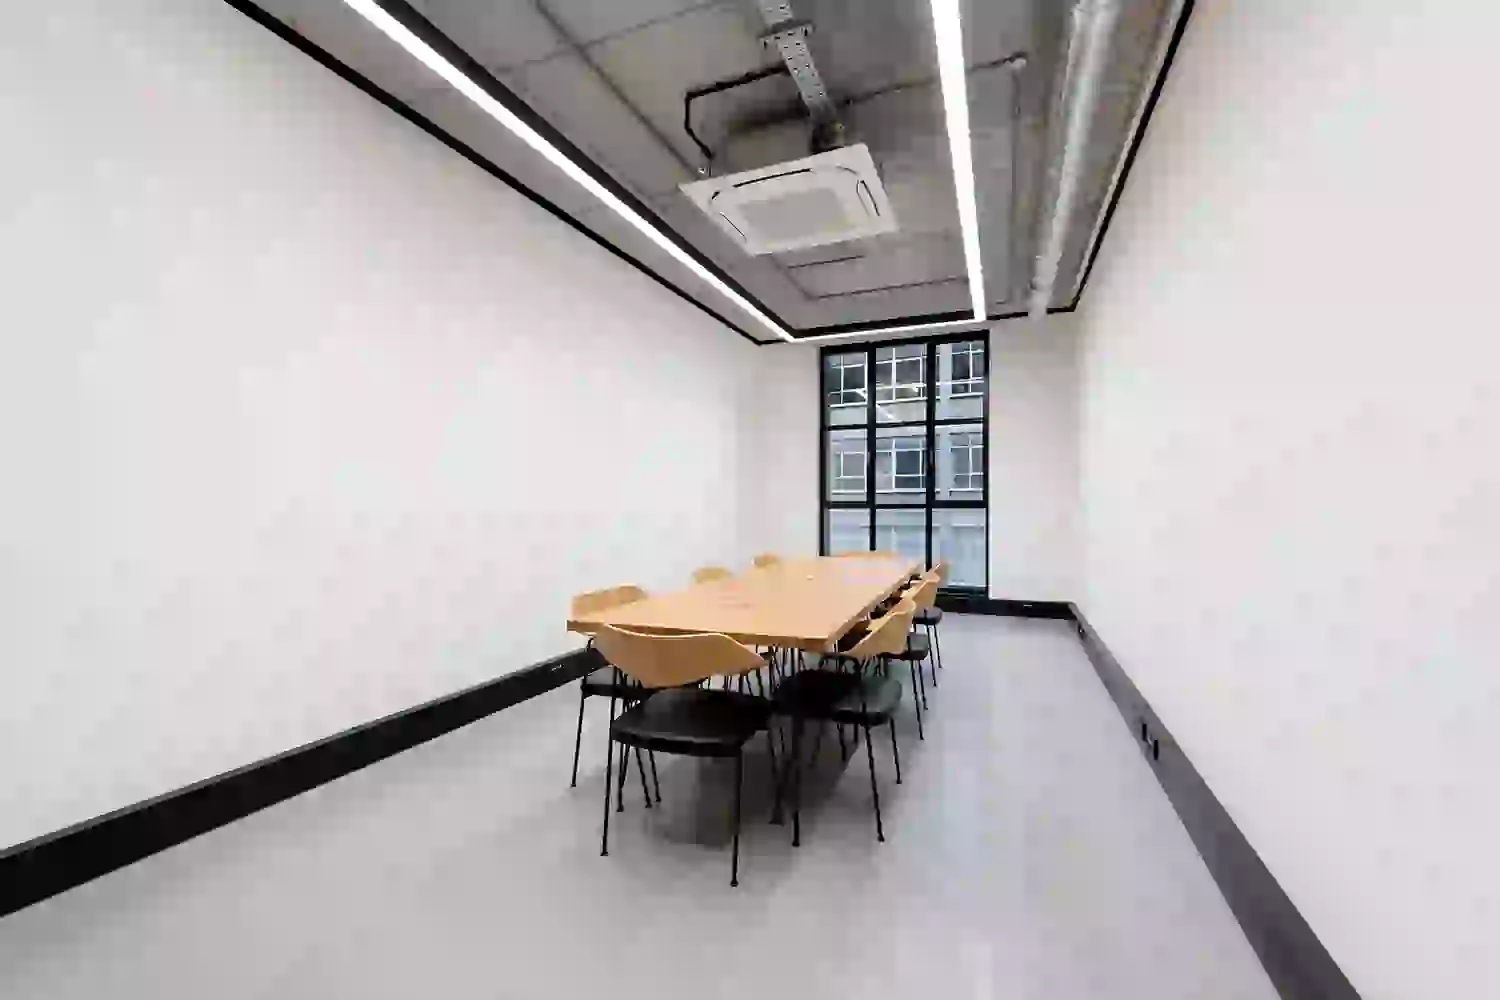 Office space to rent at The Frames, 1 Phipp Street, London, unit FR.TR01, 297 sq ft (27 sq m).